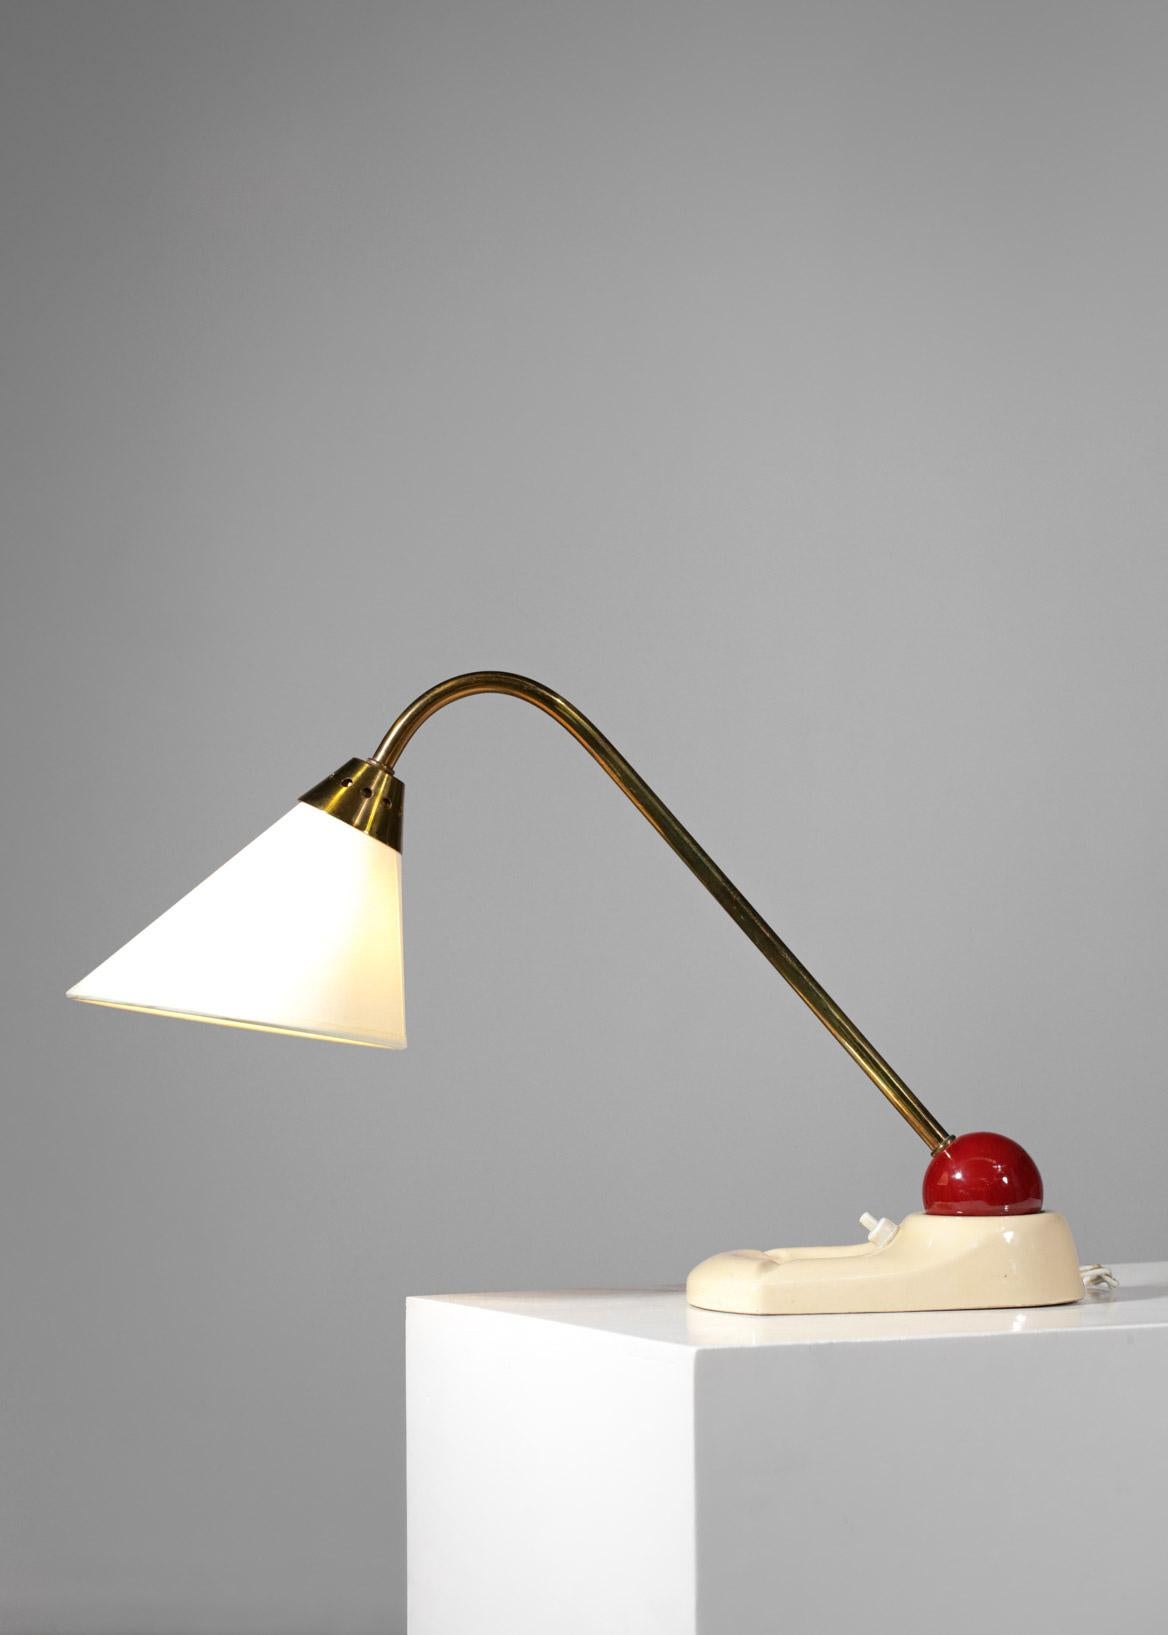 French Ceramic Table Lamp 60's Ball in Style of George Jouve Vintage Brass 7